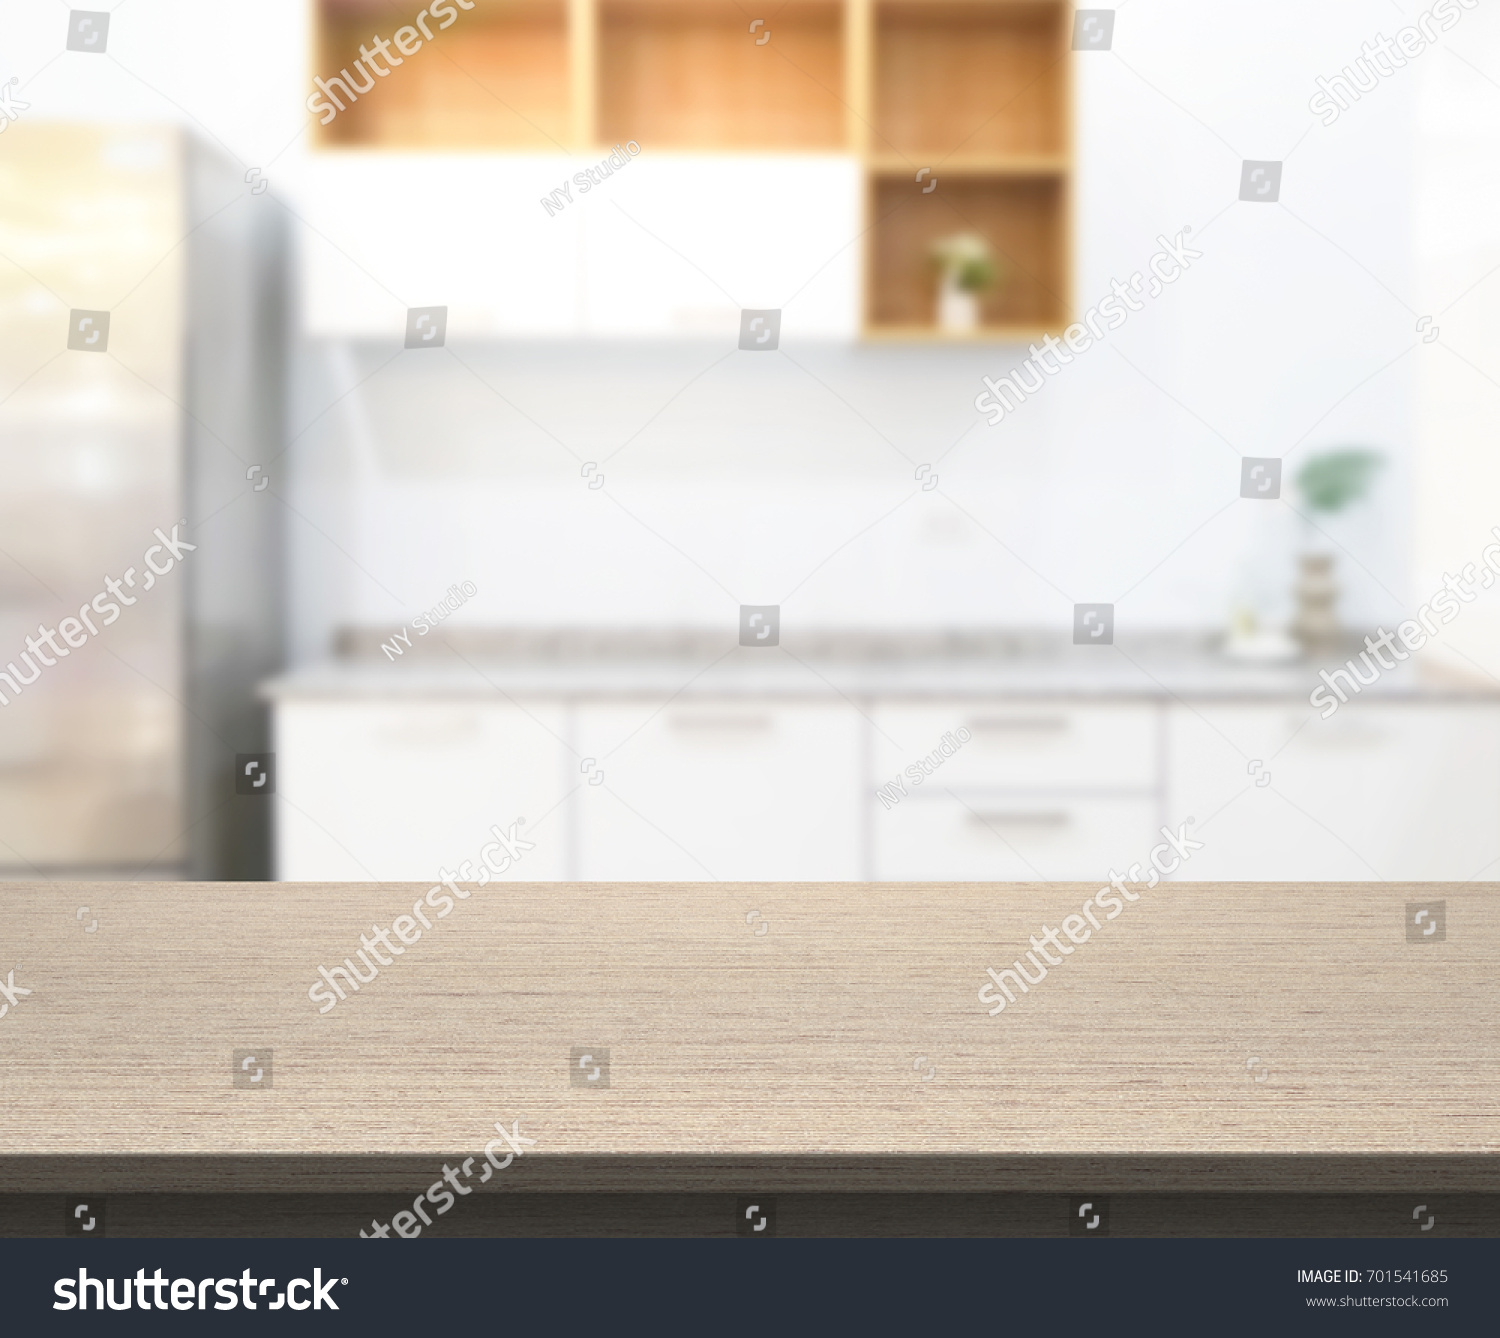 Table Top And Blur Kitchen Room Of The Background #701541685